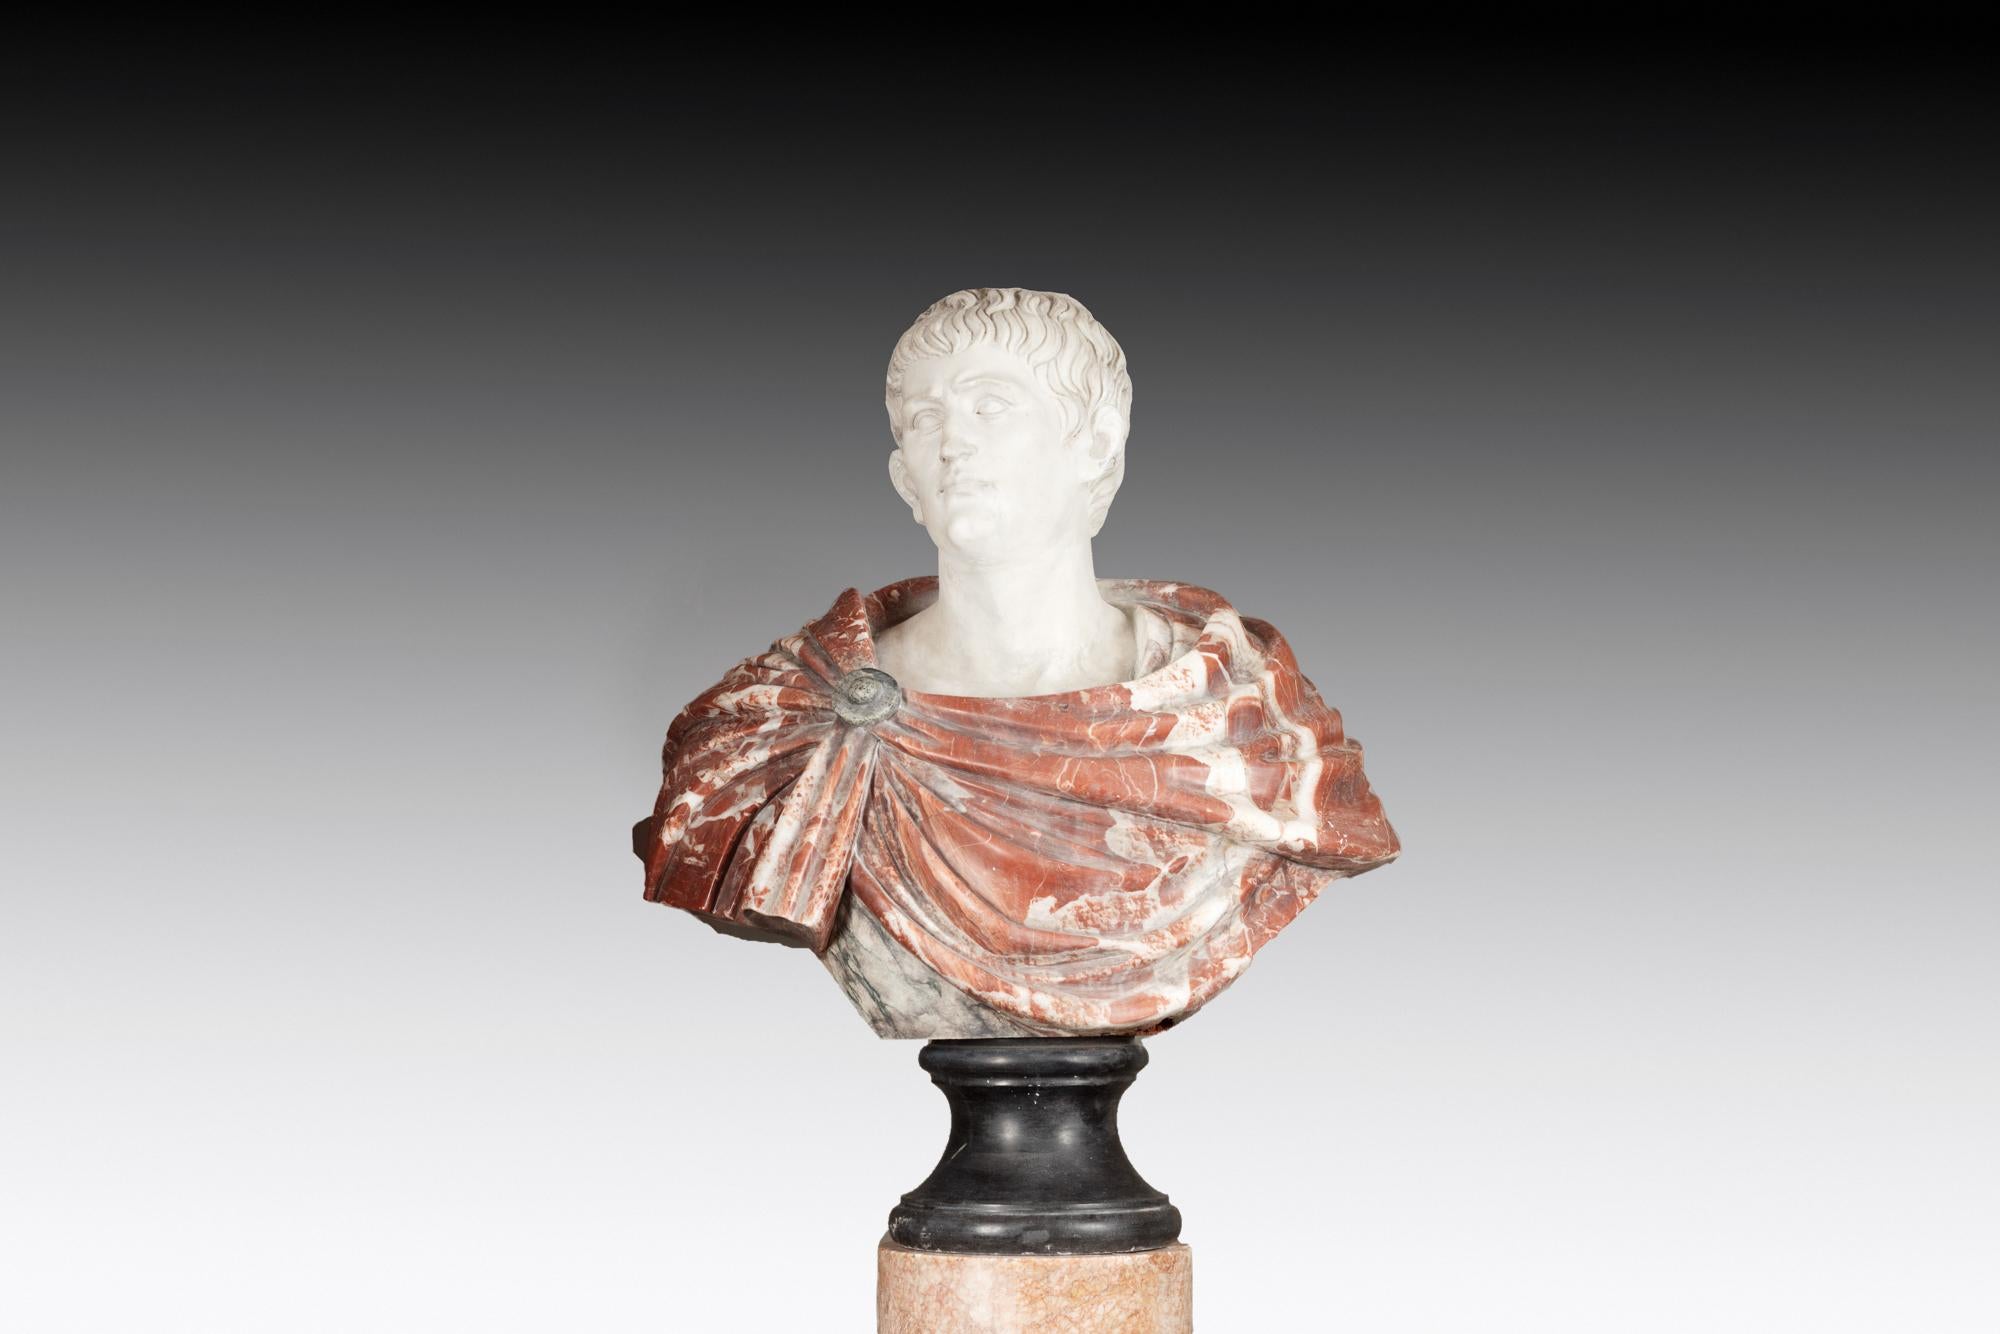 18th Century Italian Marble Bust of Caesar Augustus. His draped robe is hand-carved in red rosso levanto marble with the face modelled in contrasting white Carrara marble. The piece sits on a cylindrical plinth base of dark nero marquina.